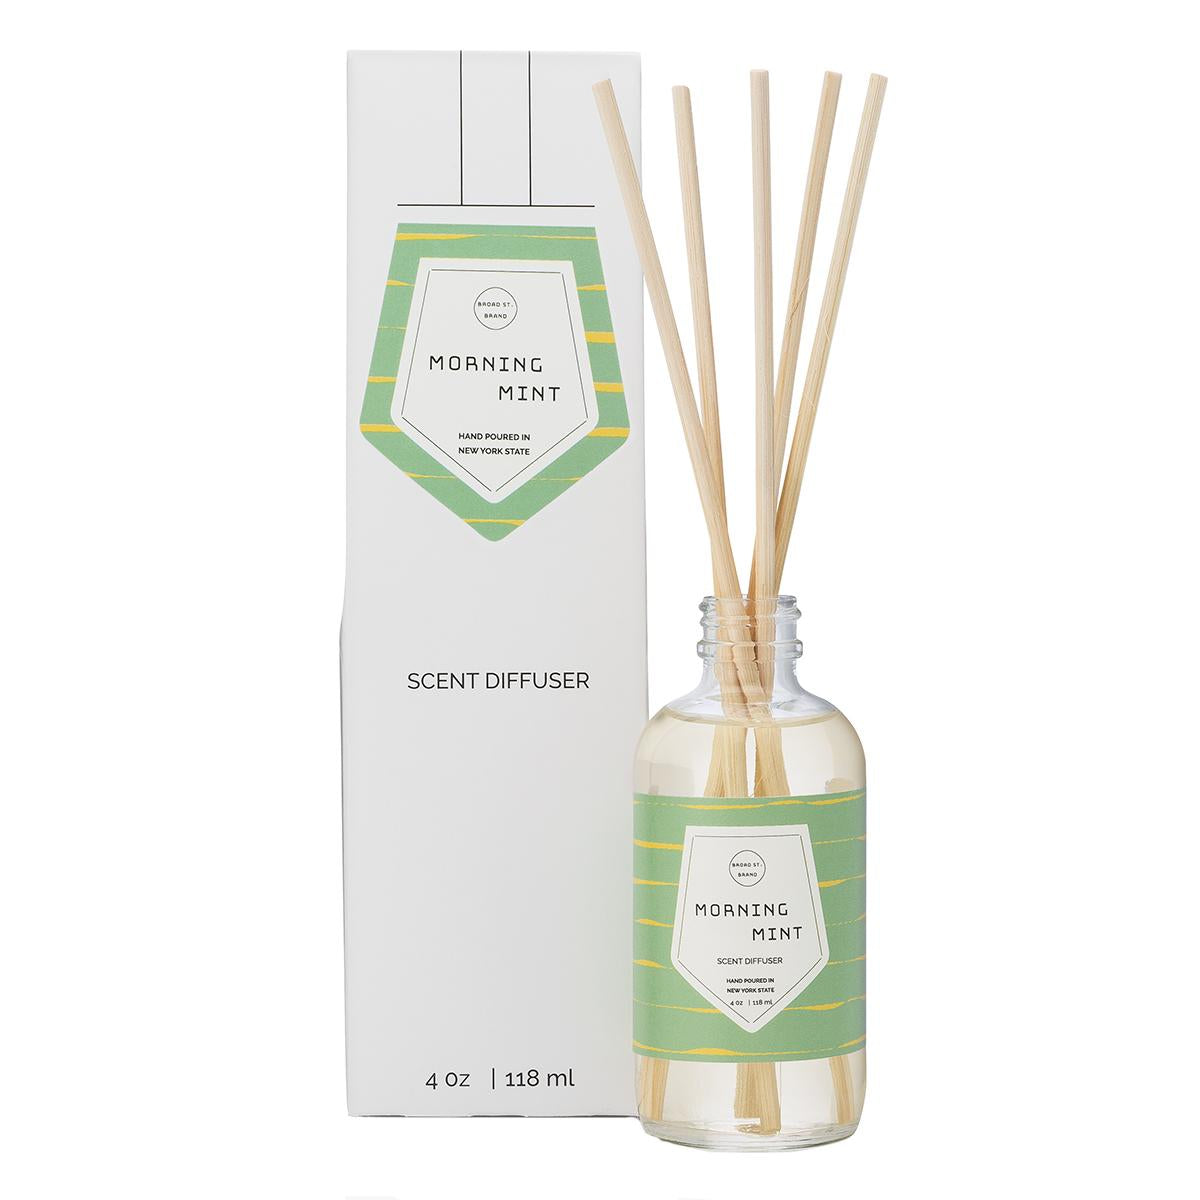 Primary image of Morning Mint Scent Diffuser